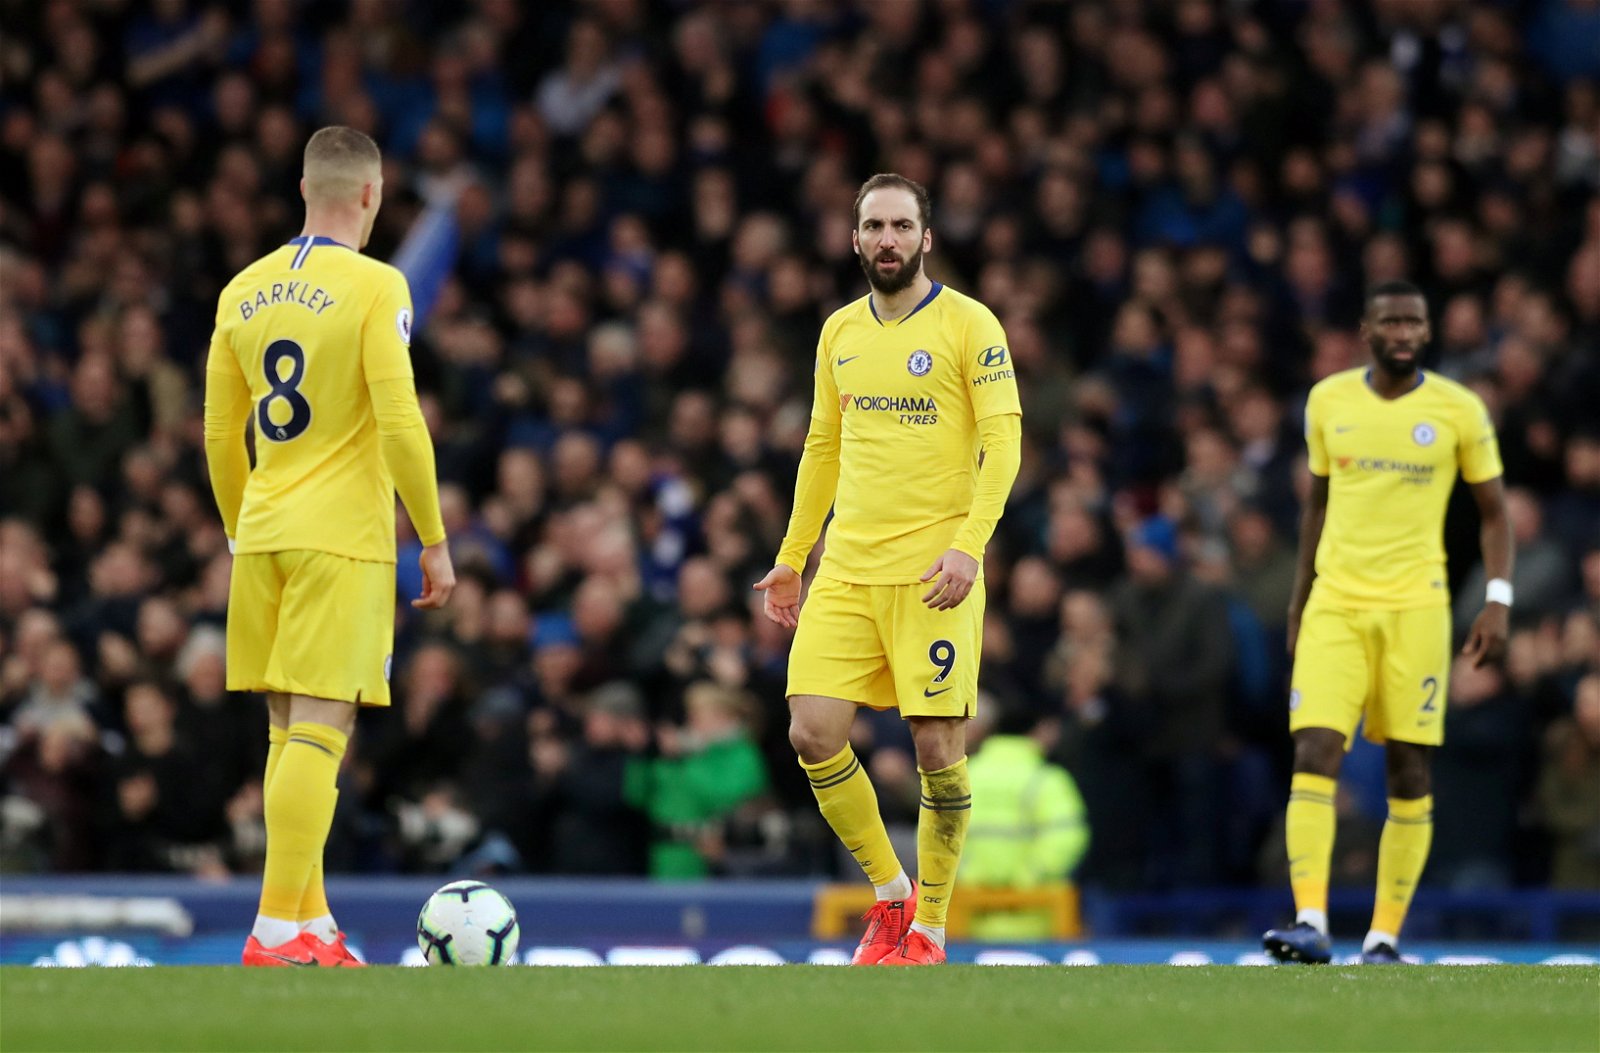 Sarri calls for Higuain to be at his best